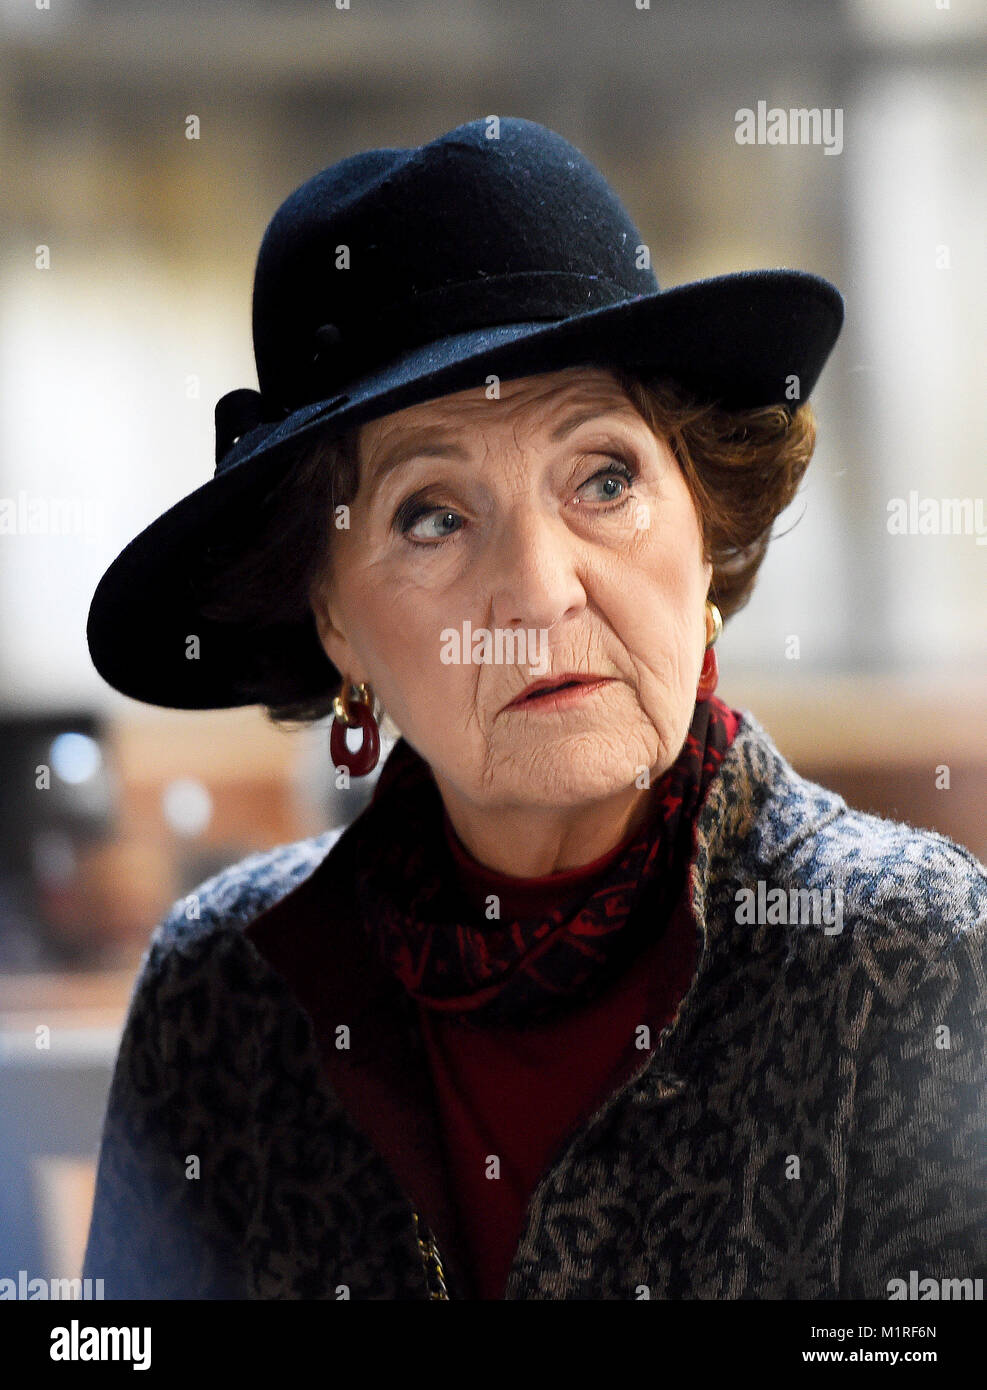 Ouwerkerk, Netherlands. 01st Feb, 2018. Princess Margriet of The Netherlands in Ouwerkerk, on February 1, 2018, to attend the National Remembrance Flood disaster at the National Monument Flood 1953 Credit: Albert Nieboer/Netherlands OUT/Point De Vue Out Credit: Albert Nieboer/Royal Press Europe/RPE/dpa/Alamy Live News Stock Photo